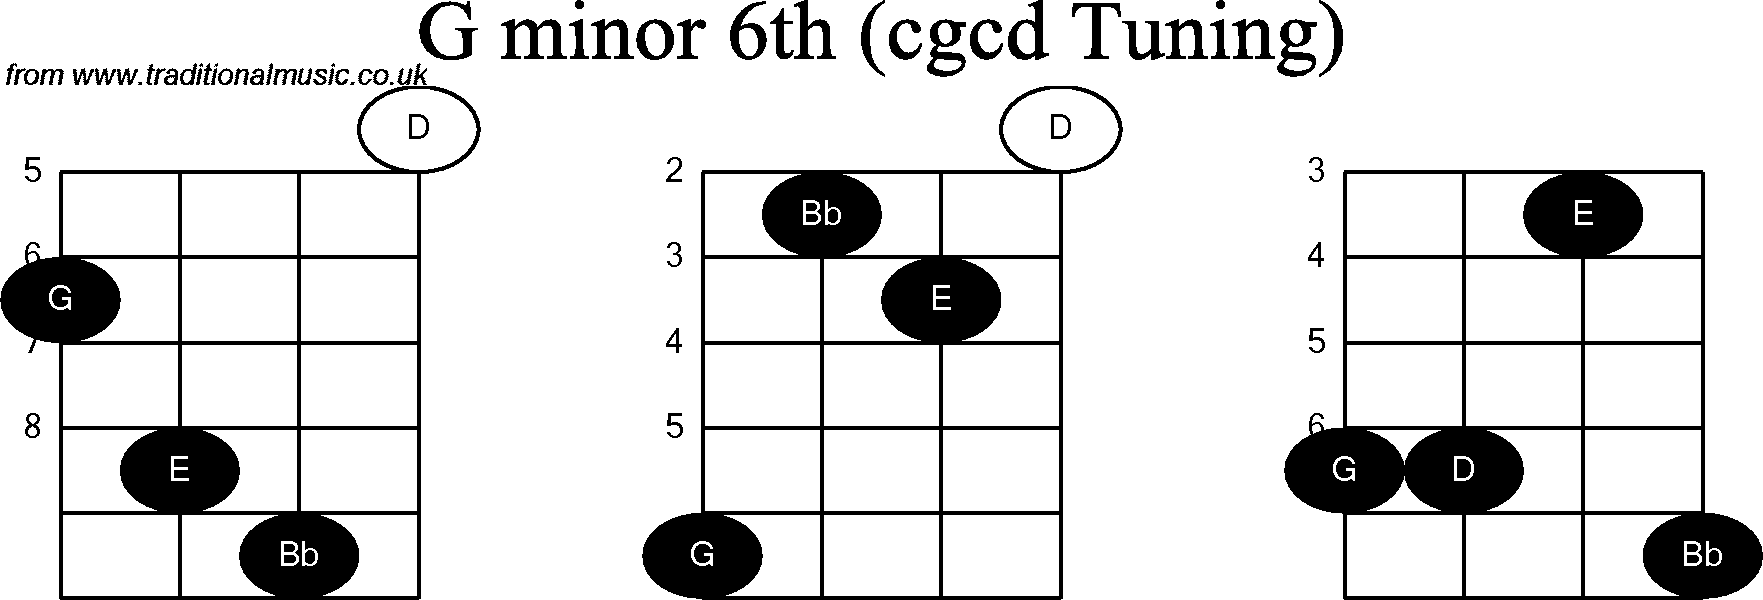 Chord diagrams for Banjo(Double C) G Minor6th